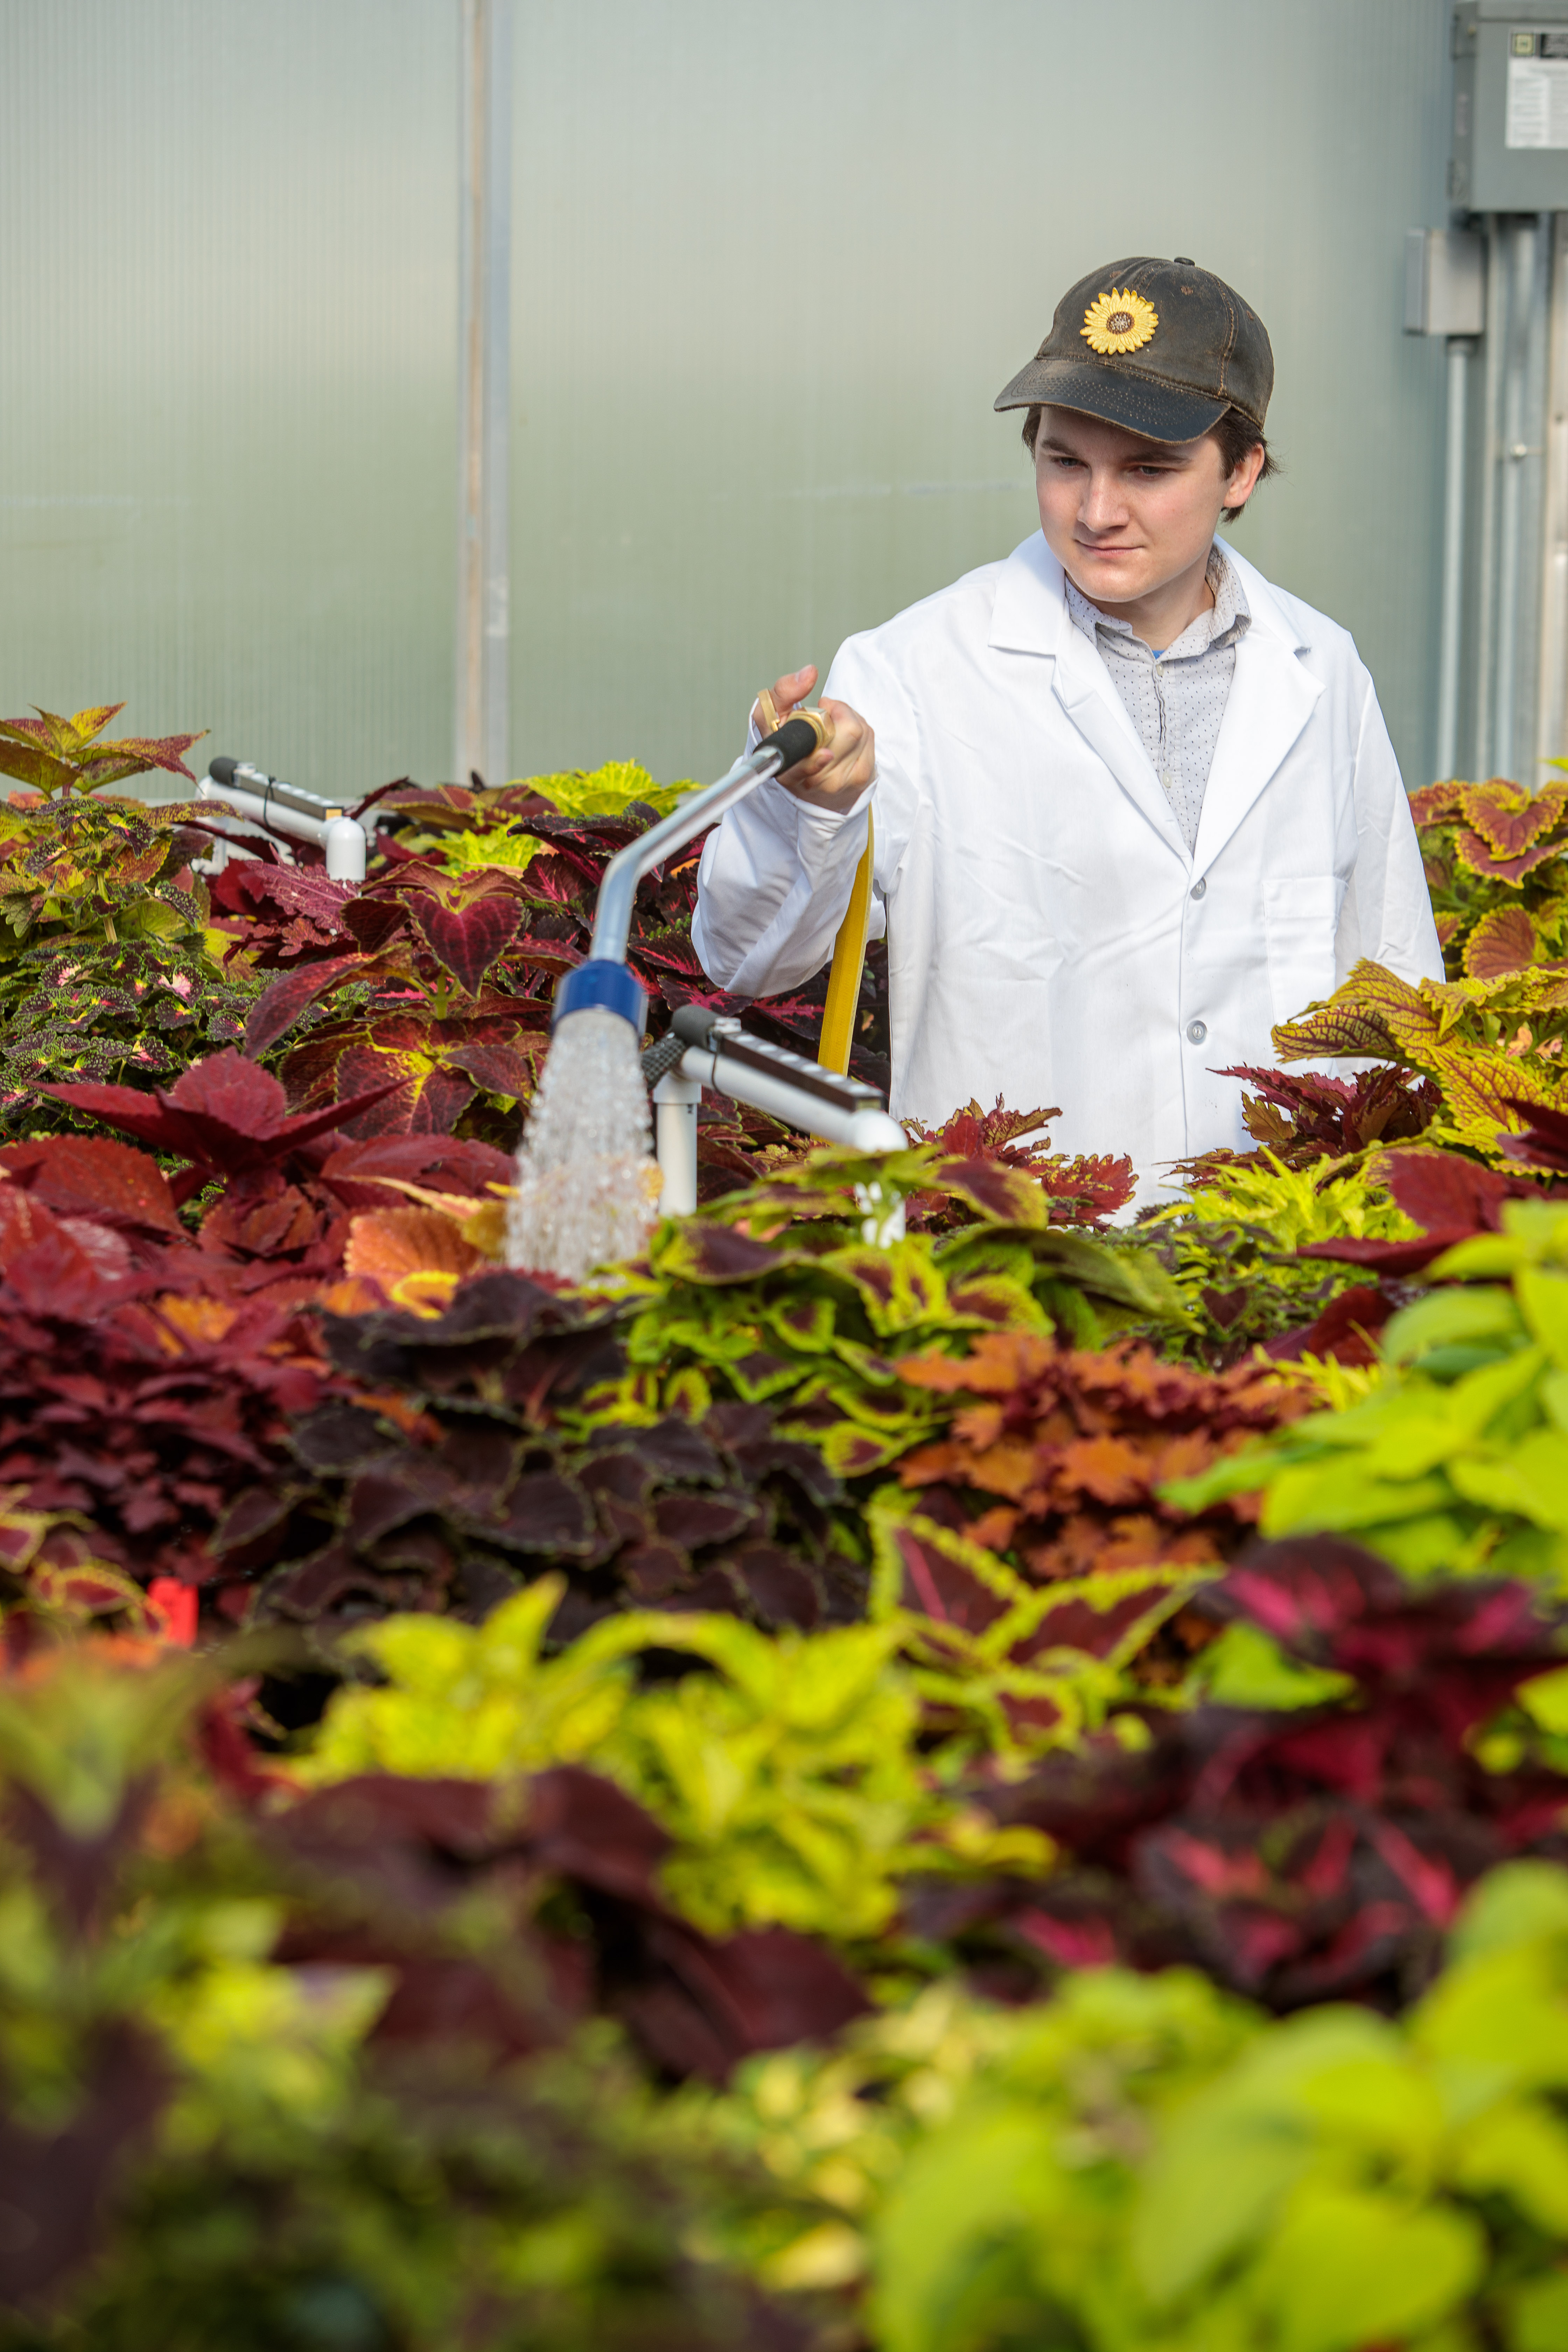 Undergraduate student Ty Rich collects data in a coleus cultivar trial he is leading at the University of Kentucky. Photo by Matt Barton